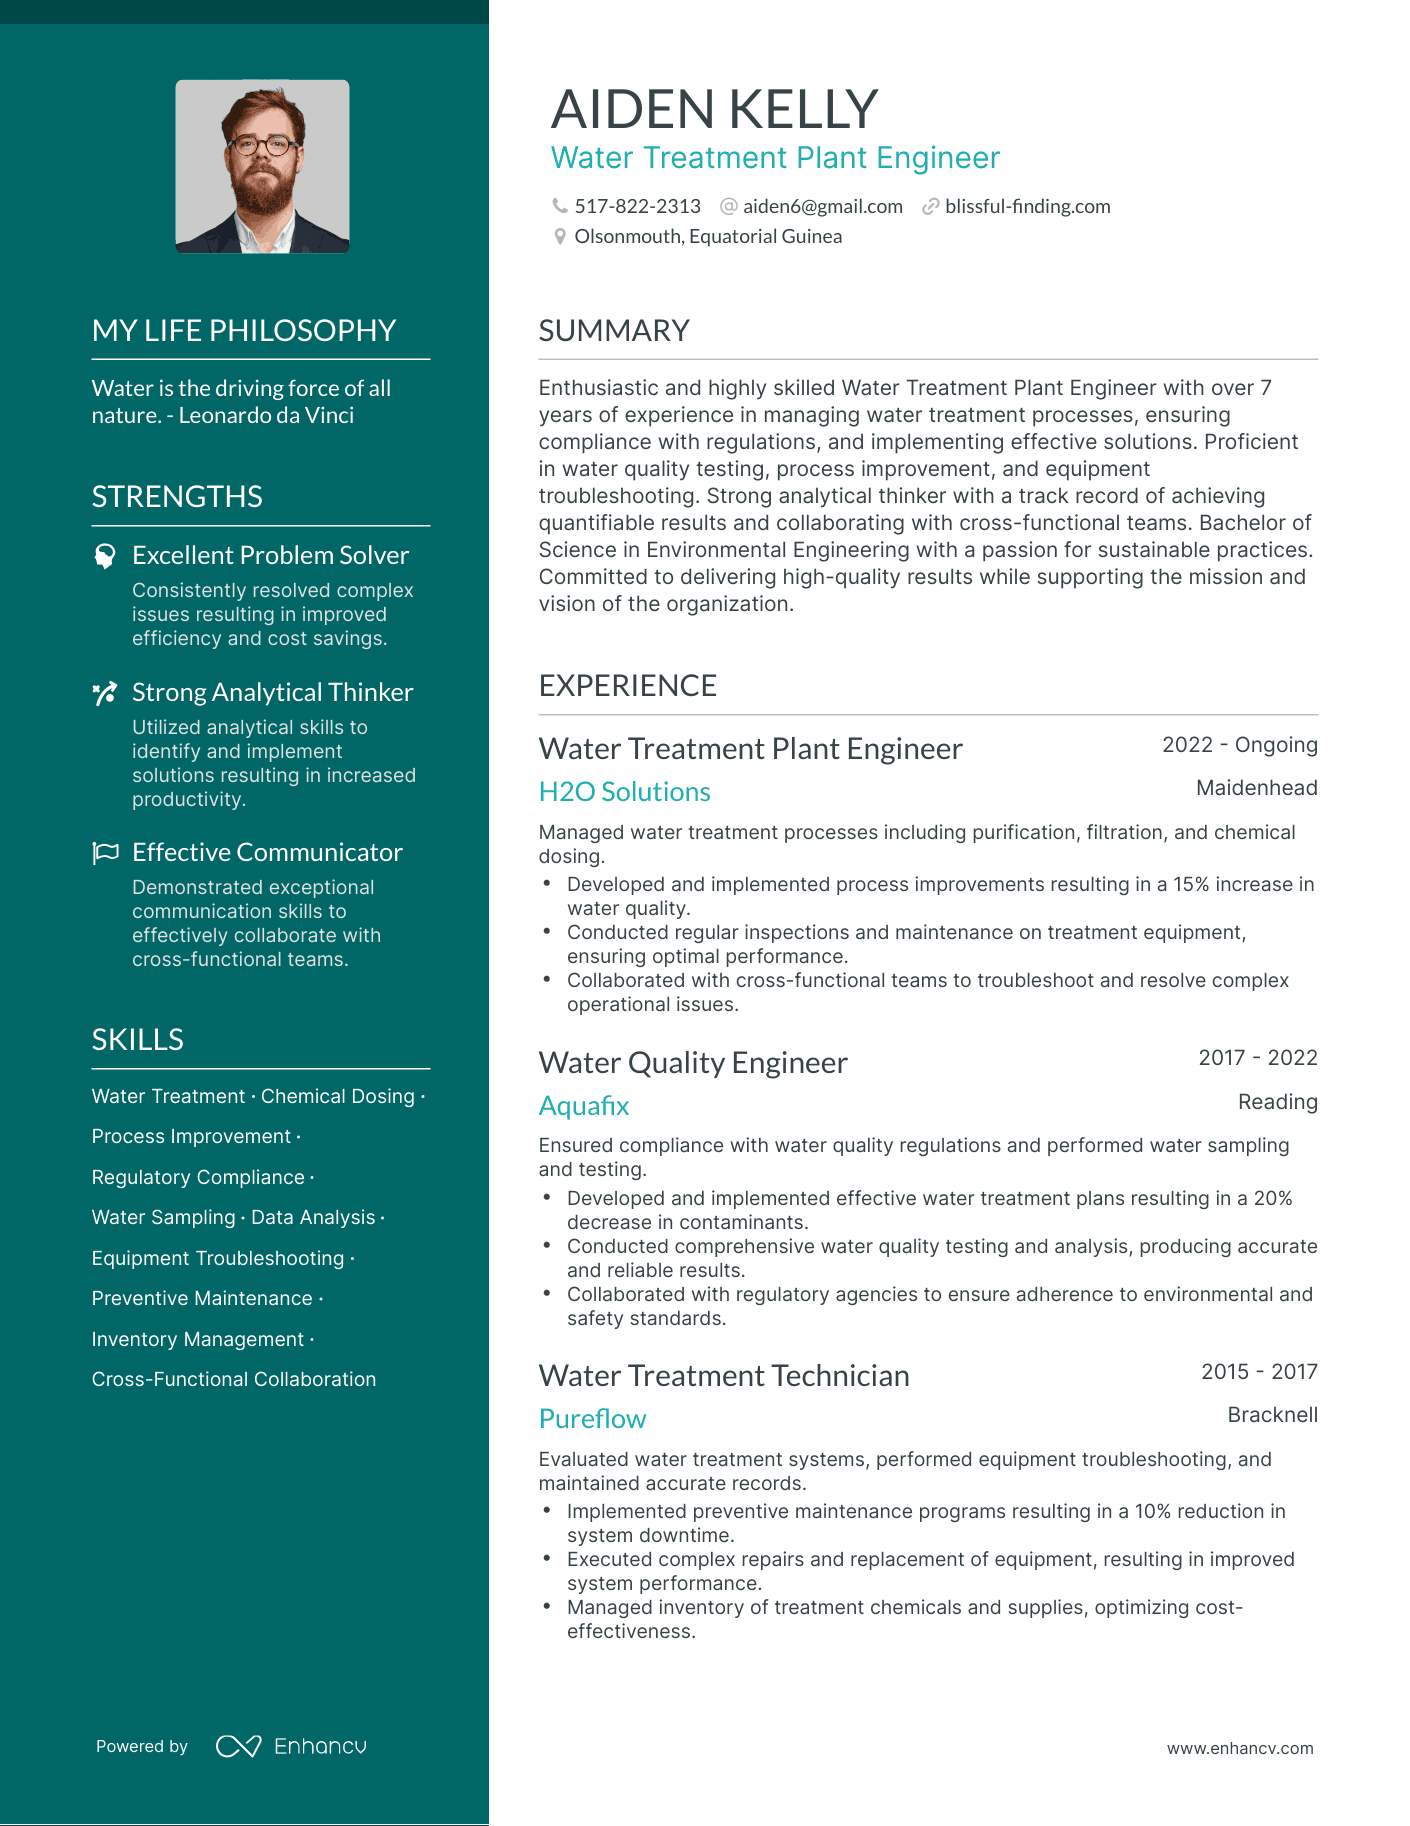 Water Treatment Plant Engineer resume example